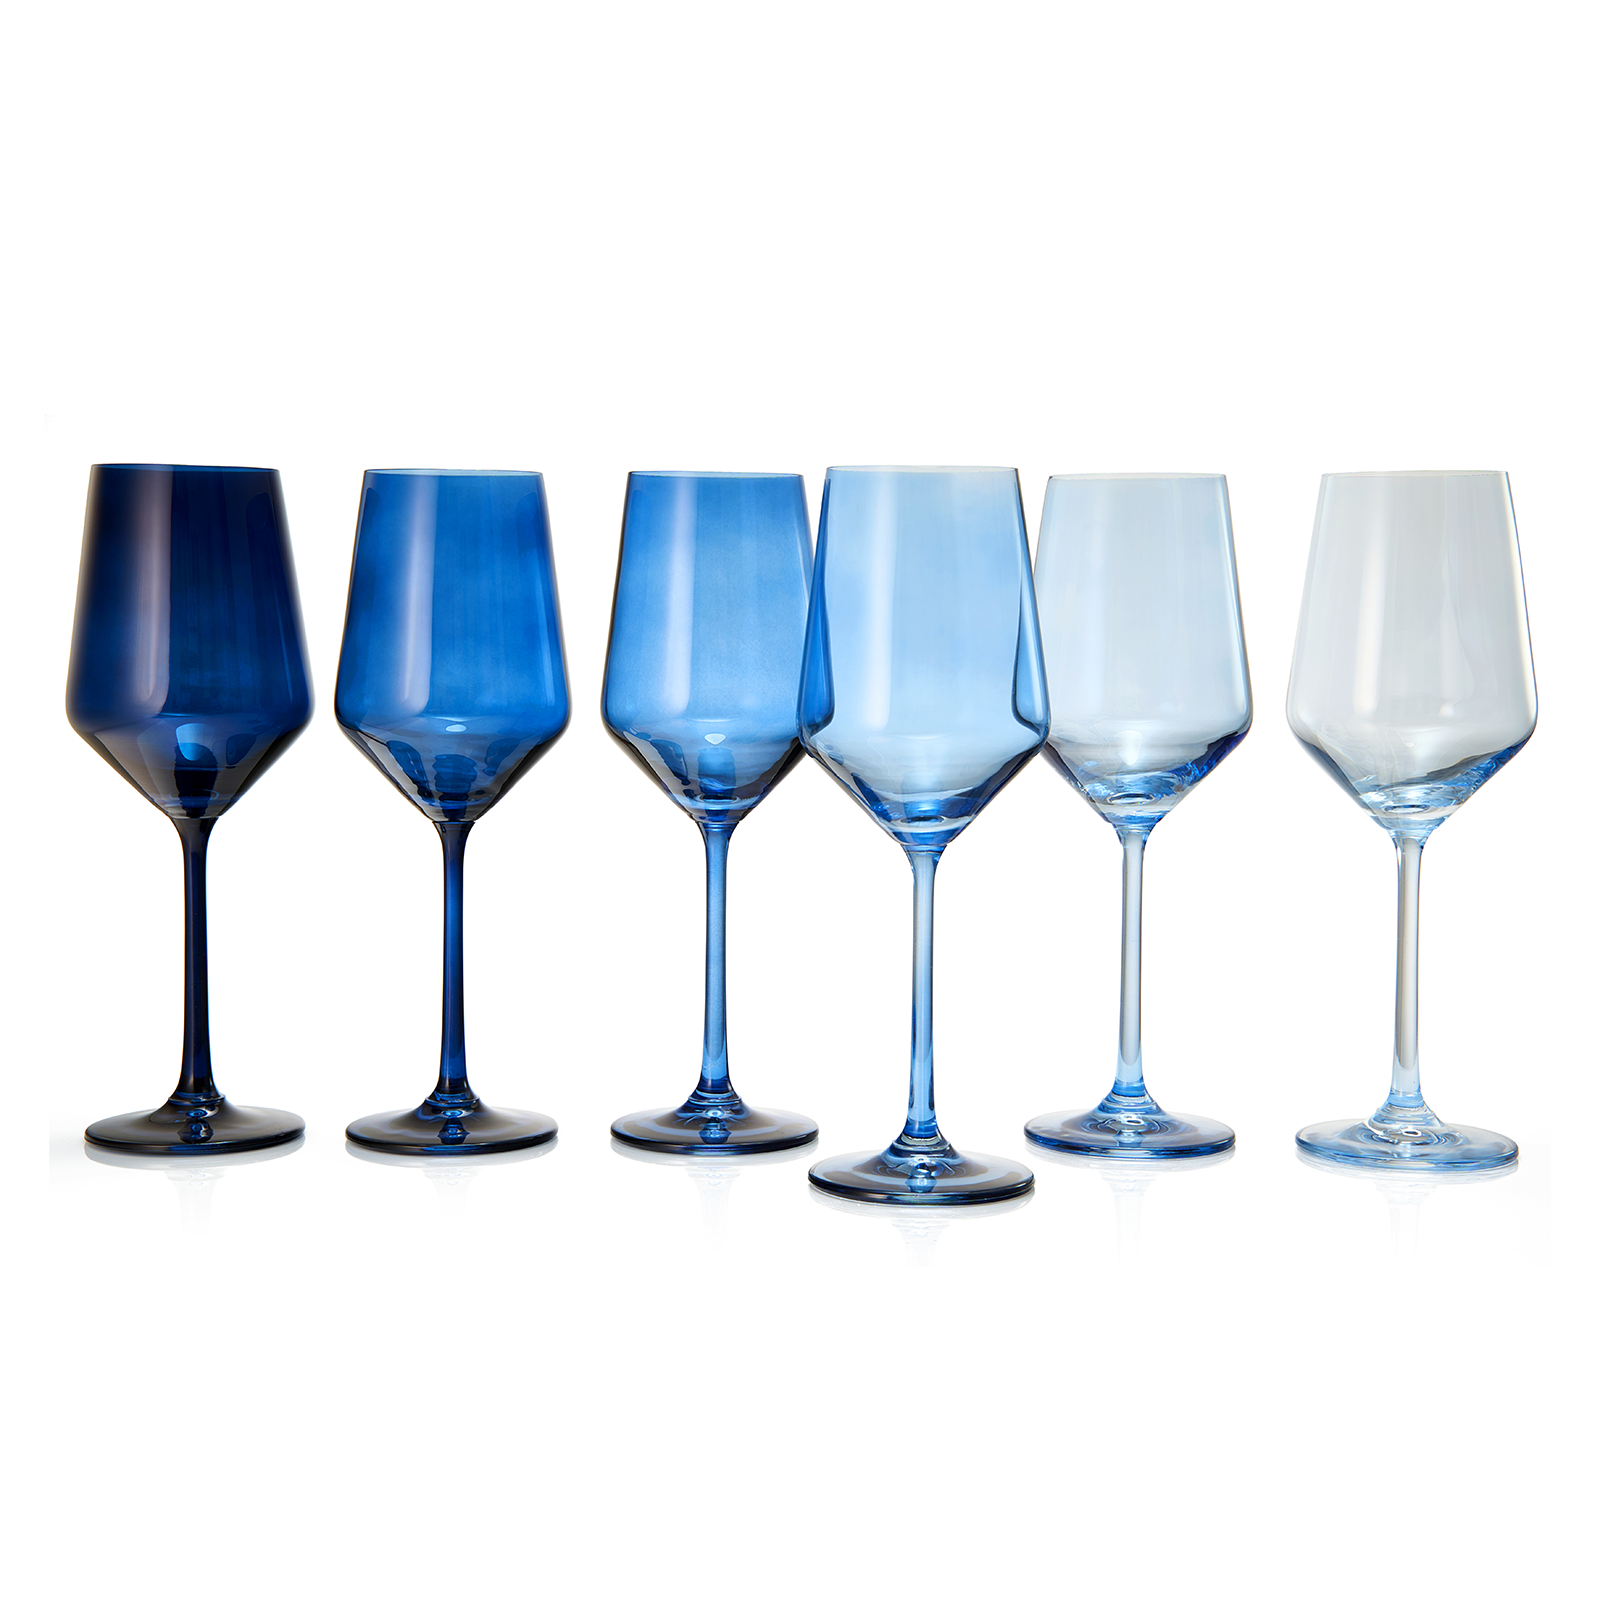 Colored Wine Glass Set, 12oz Glasses Set of 6 For All Occasions & Special Celebrations Gift For Him, Her, Wife, Friend Drinkware Unique Style Tall Stemmed for White & Red Wine Elegant Glassware (Blue)-5